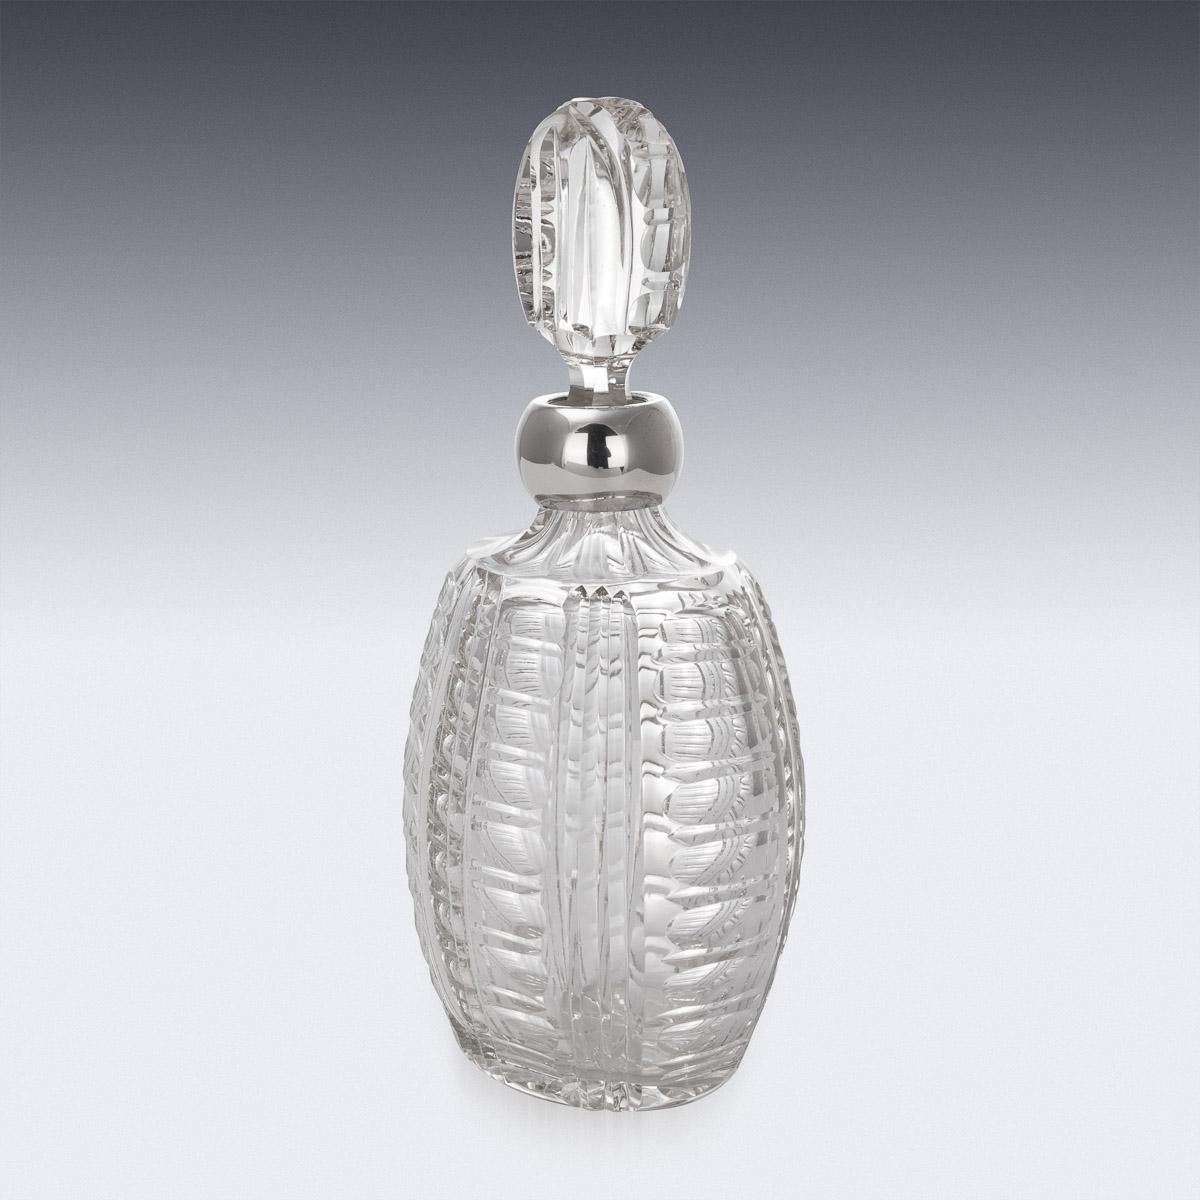 Stylish mid-20th century Italian Art Deco style solid silver and glass decanter. Of mid-size with cut crystal glass body and mounted with elegant oval stopper. Applied with a pronounced silver collar. This decanter can hold up to 0.5 liter of your